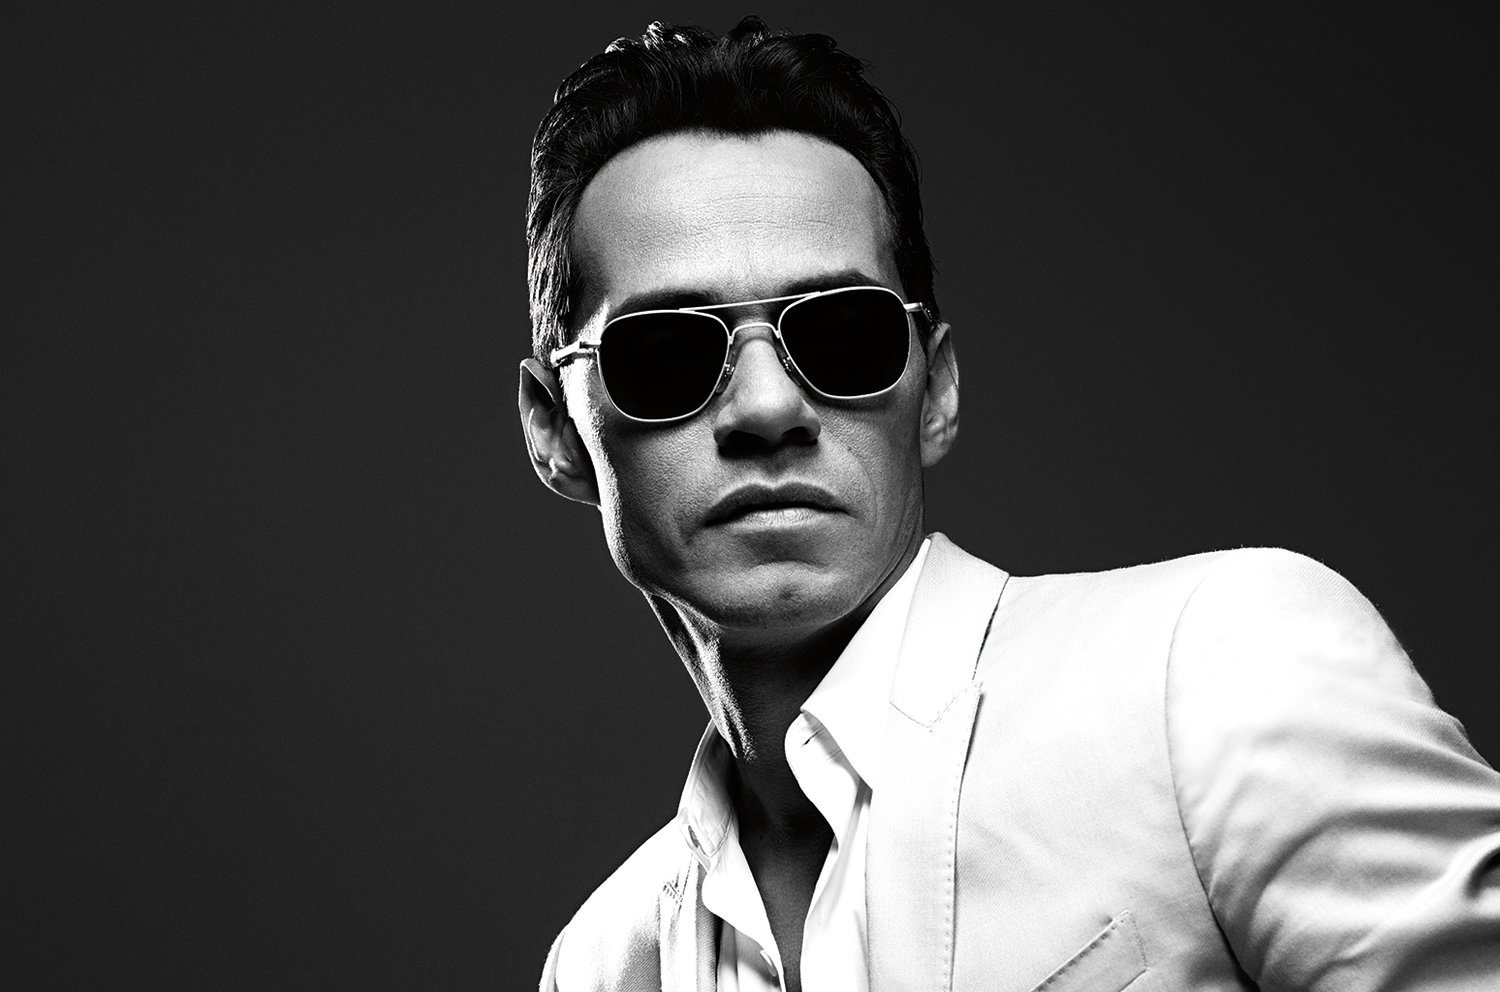 Marc Anthony Extends Tropical Airplay Chart Record With 31 No. 1s